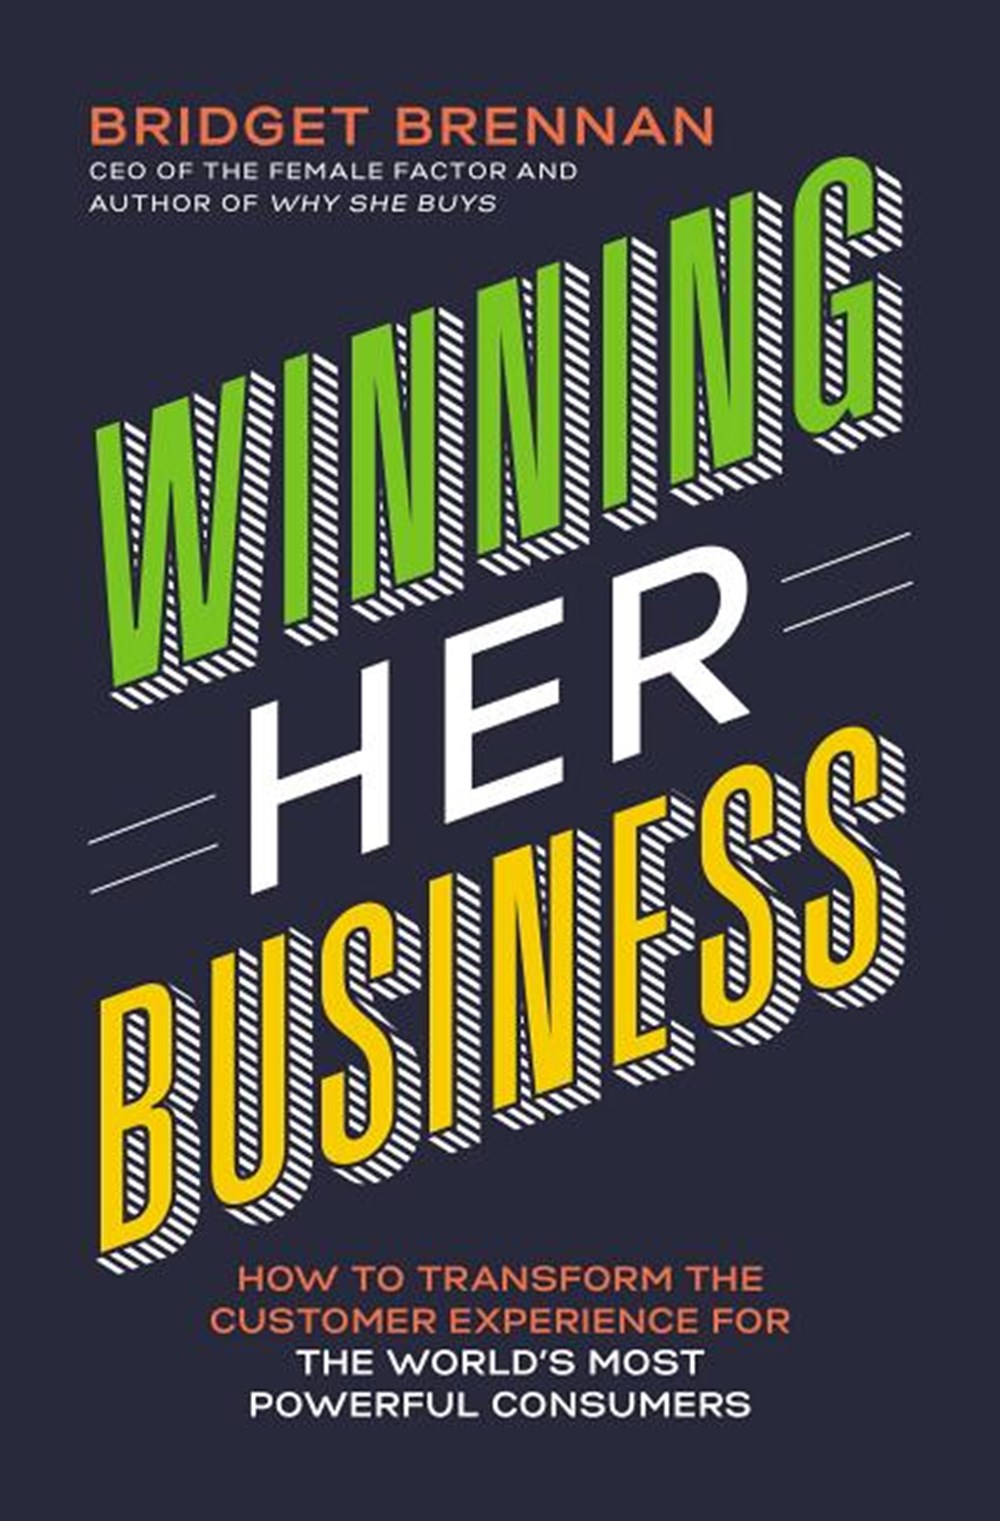 Winning Her Business How to Transform the Customer Experience for the World's Most Powerful Consumer